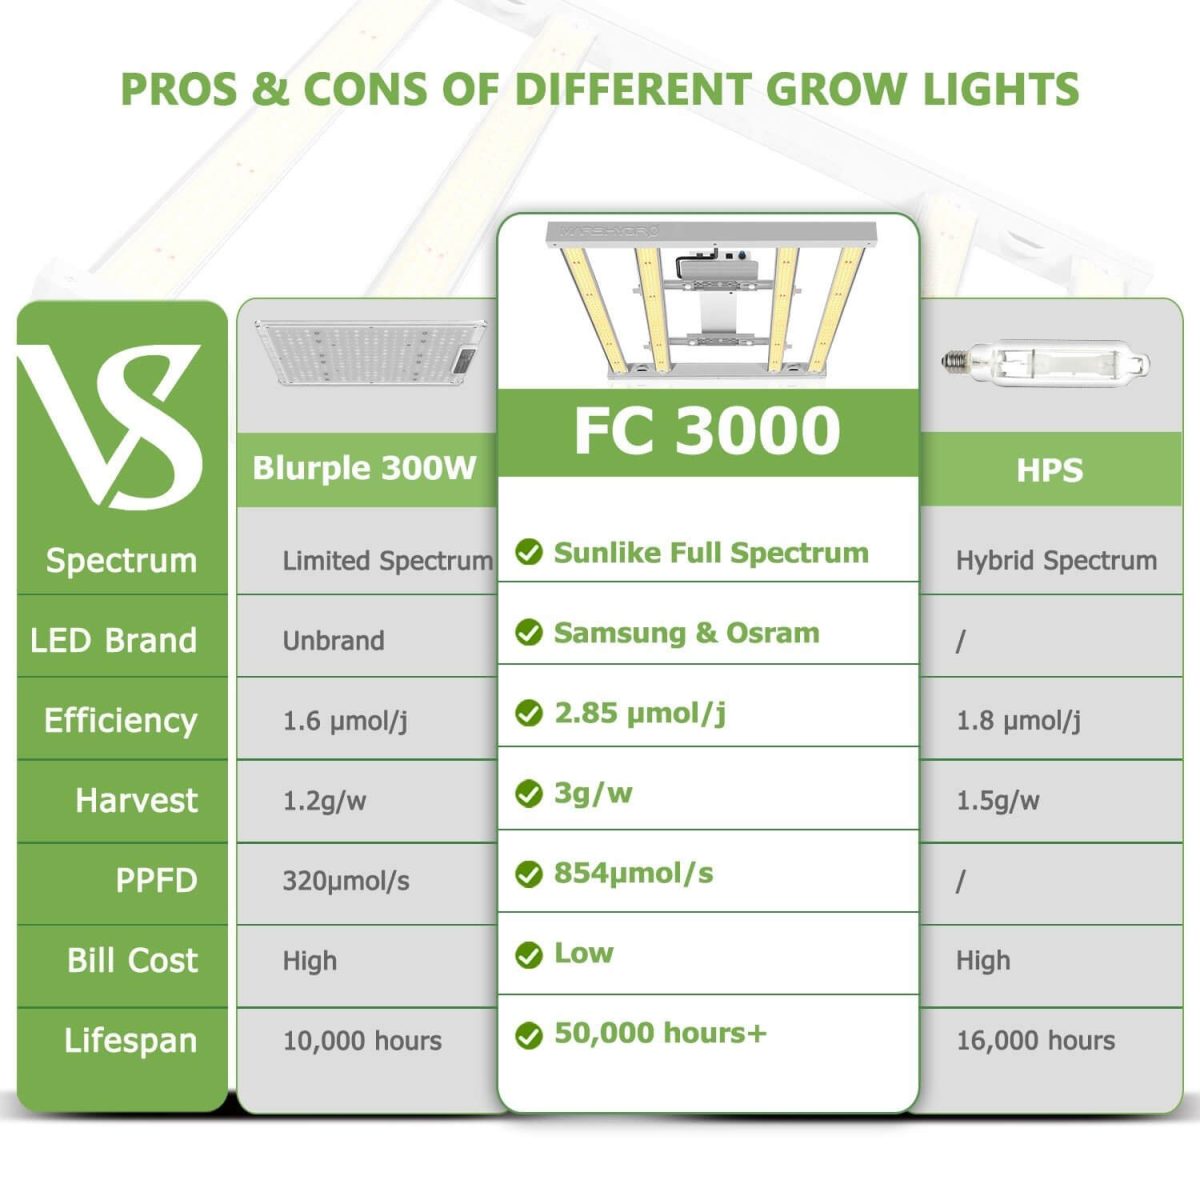 FC3000 led grow light is much better than other 300w lights in PPFD, diode brand, PPE, max yield.